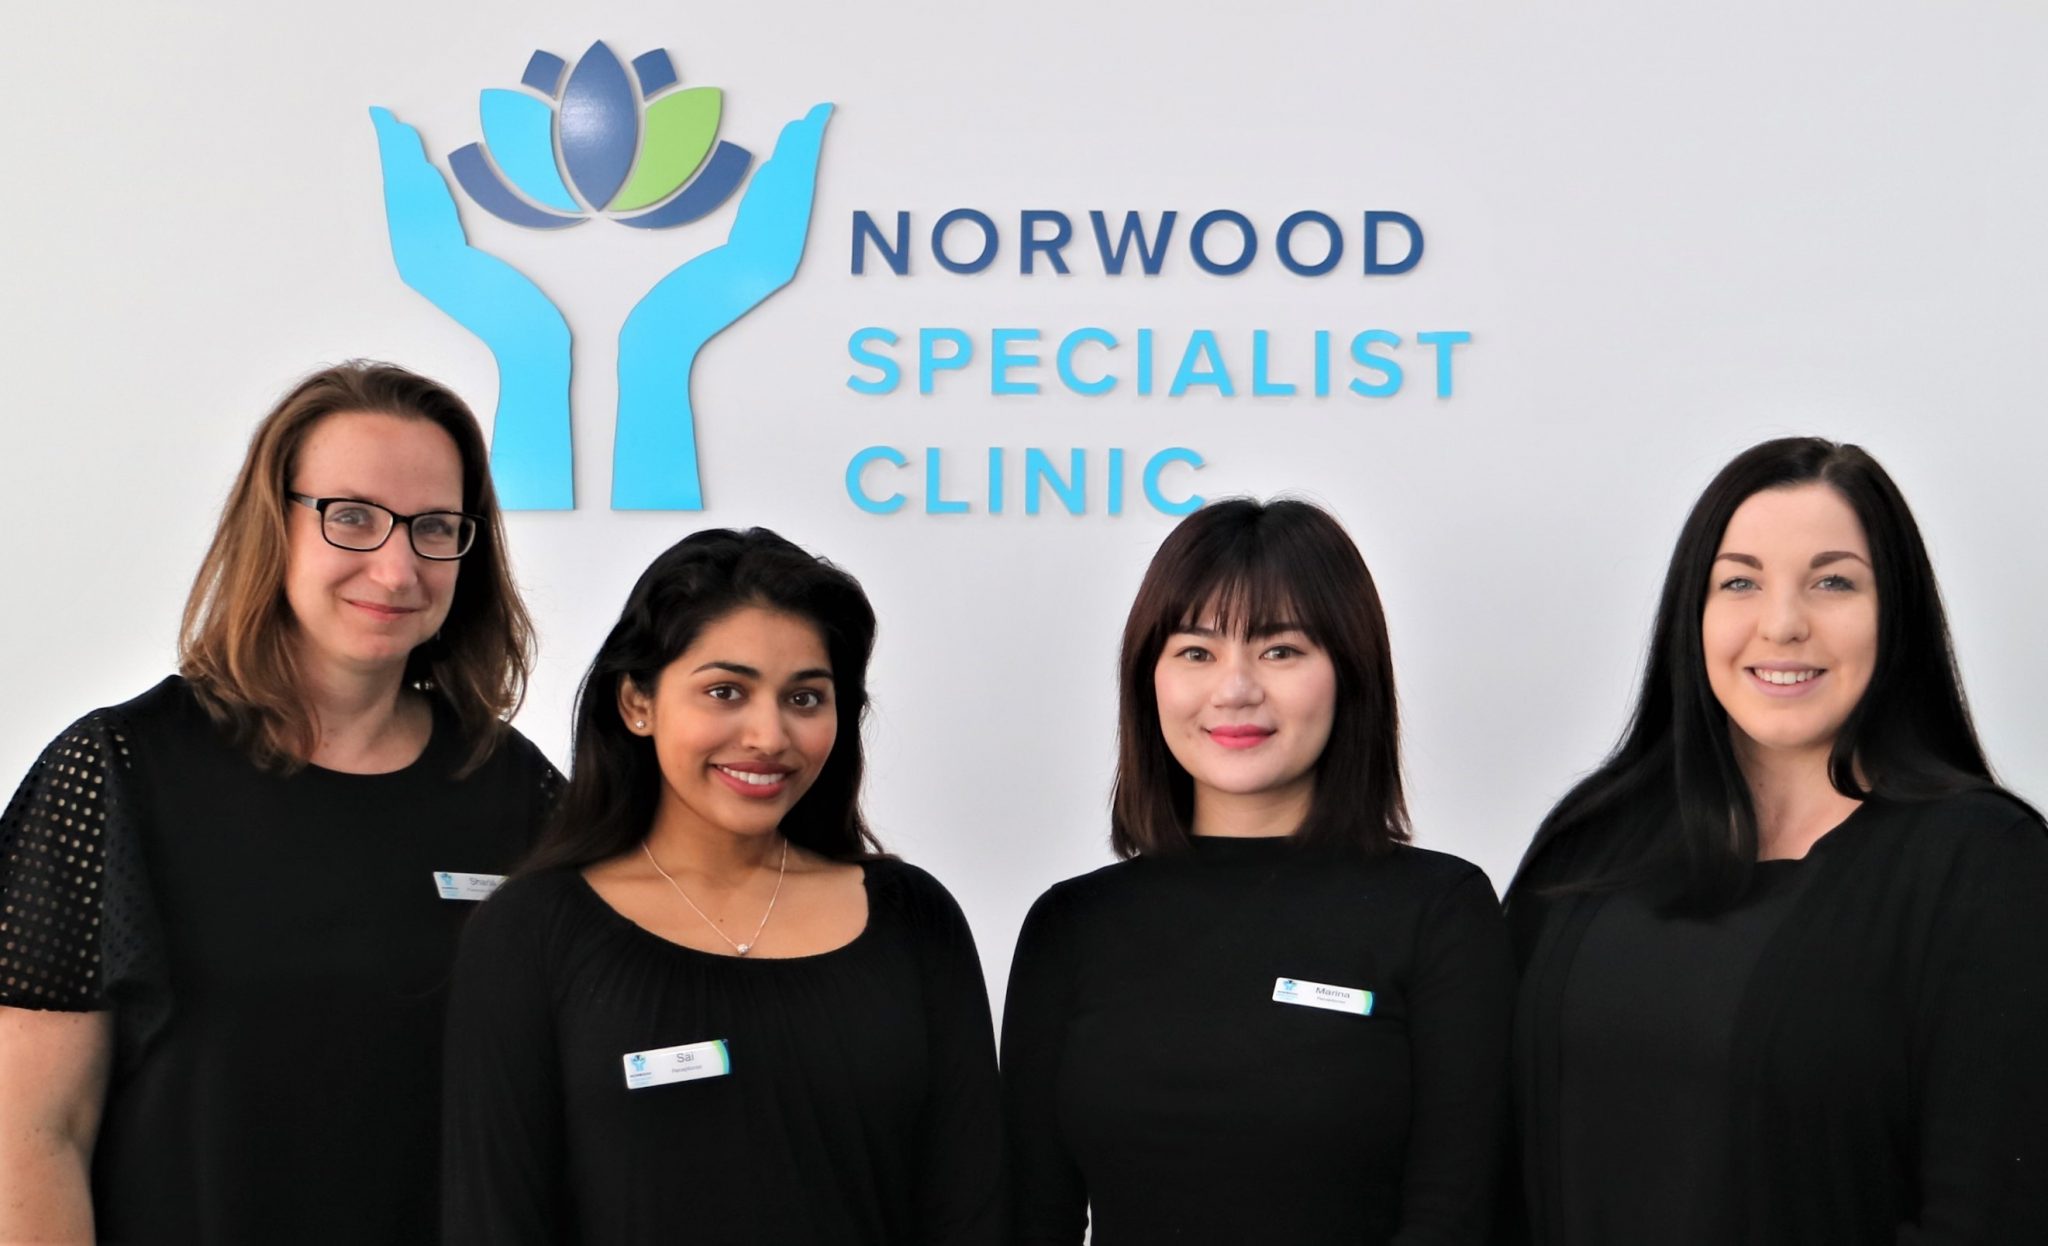 Norwood Specialist Clinic staff